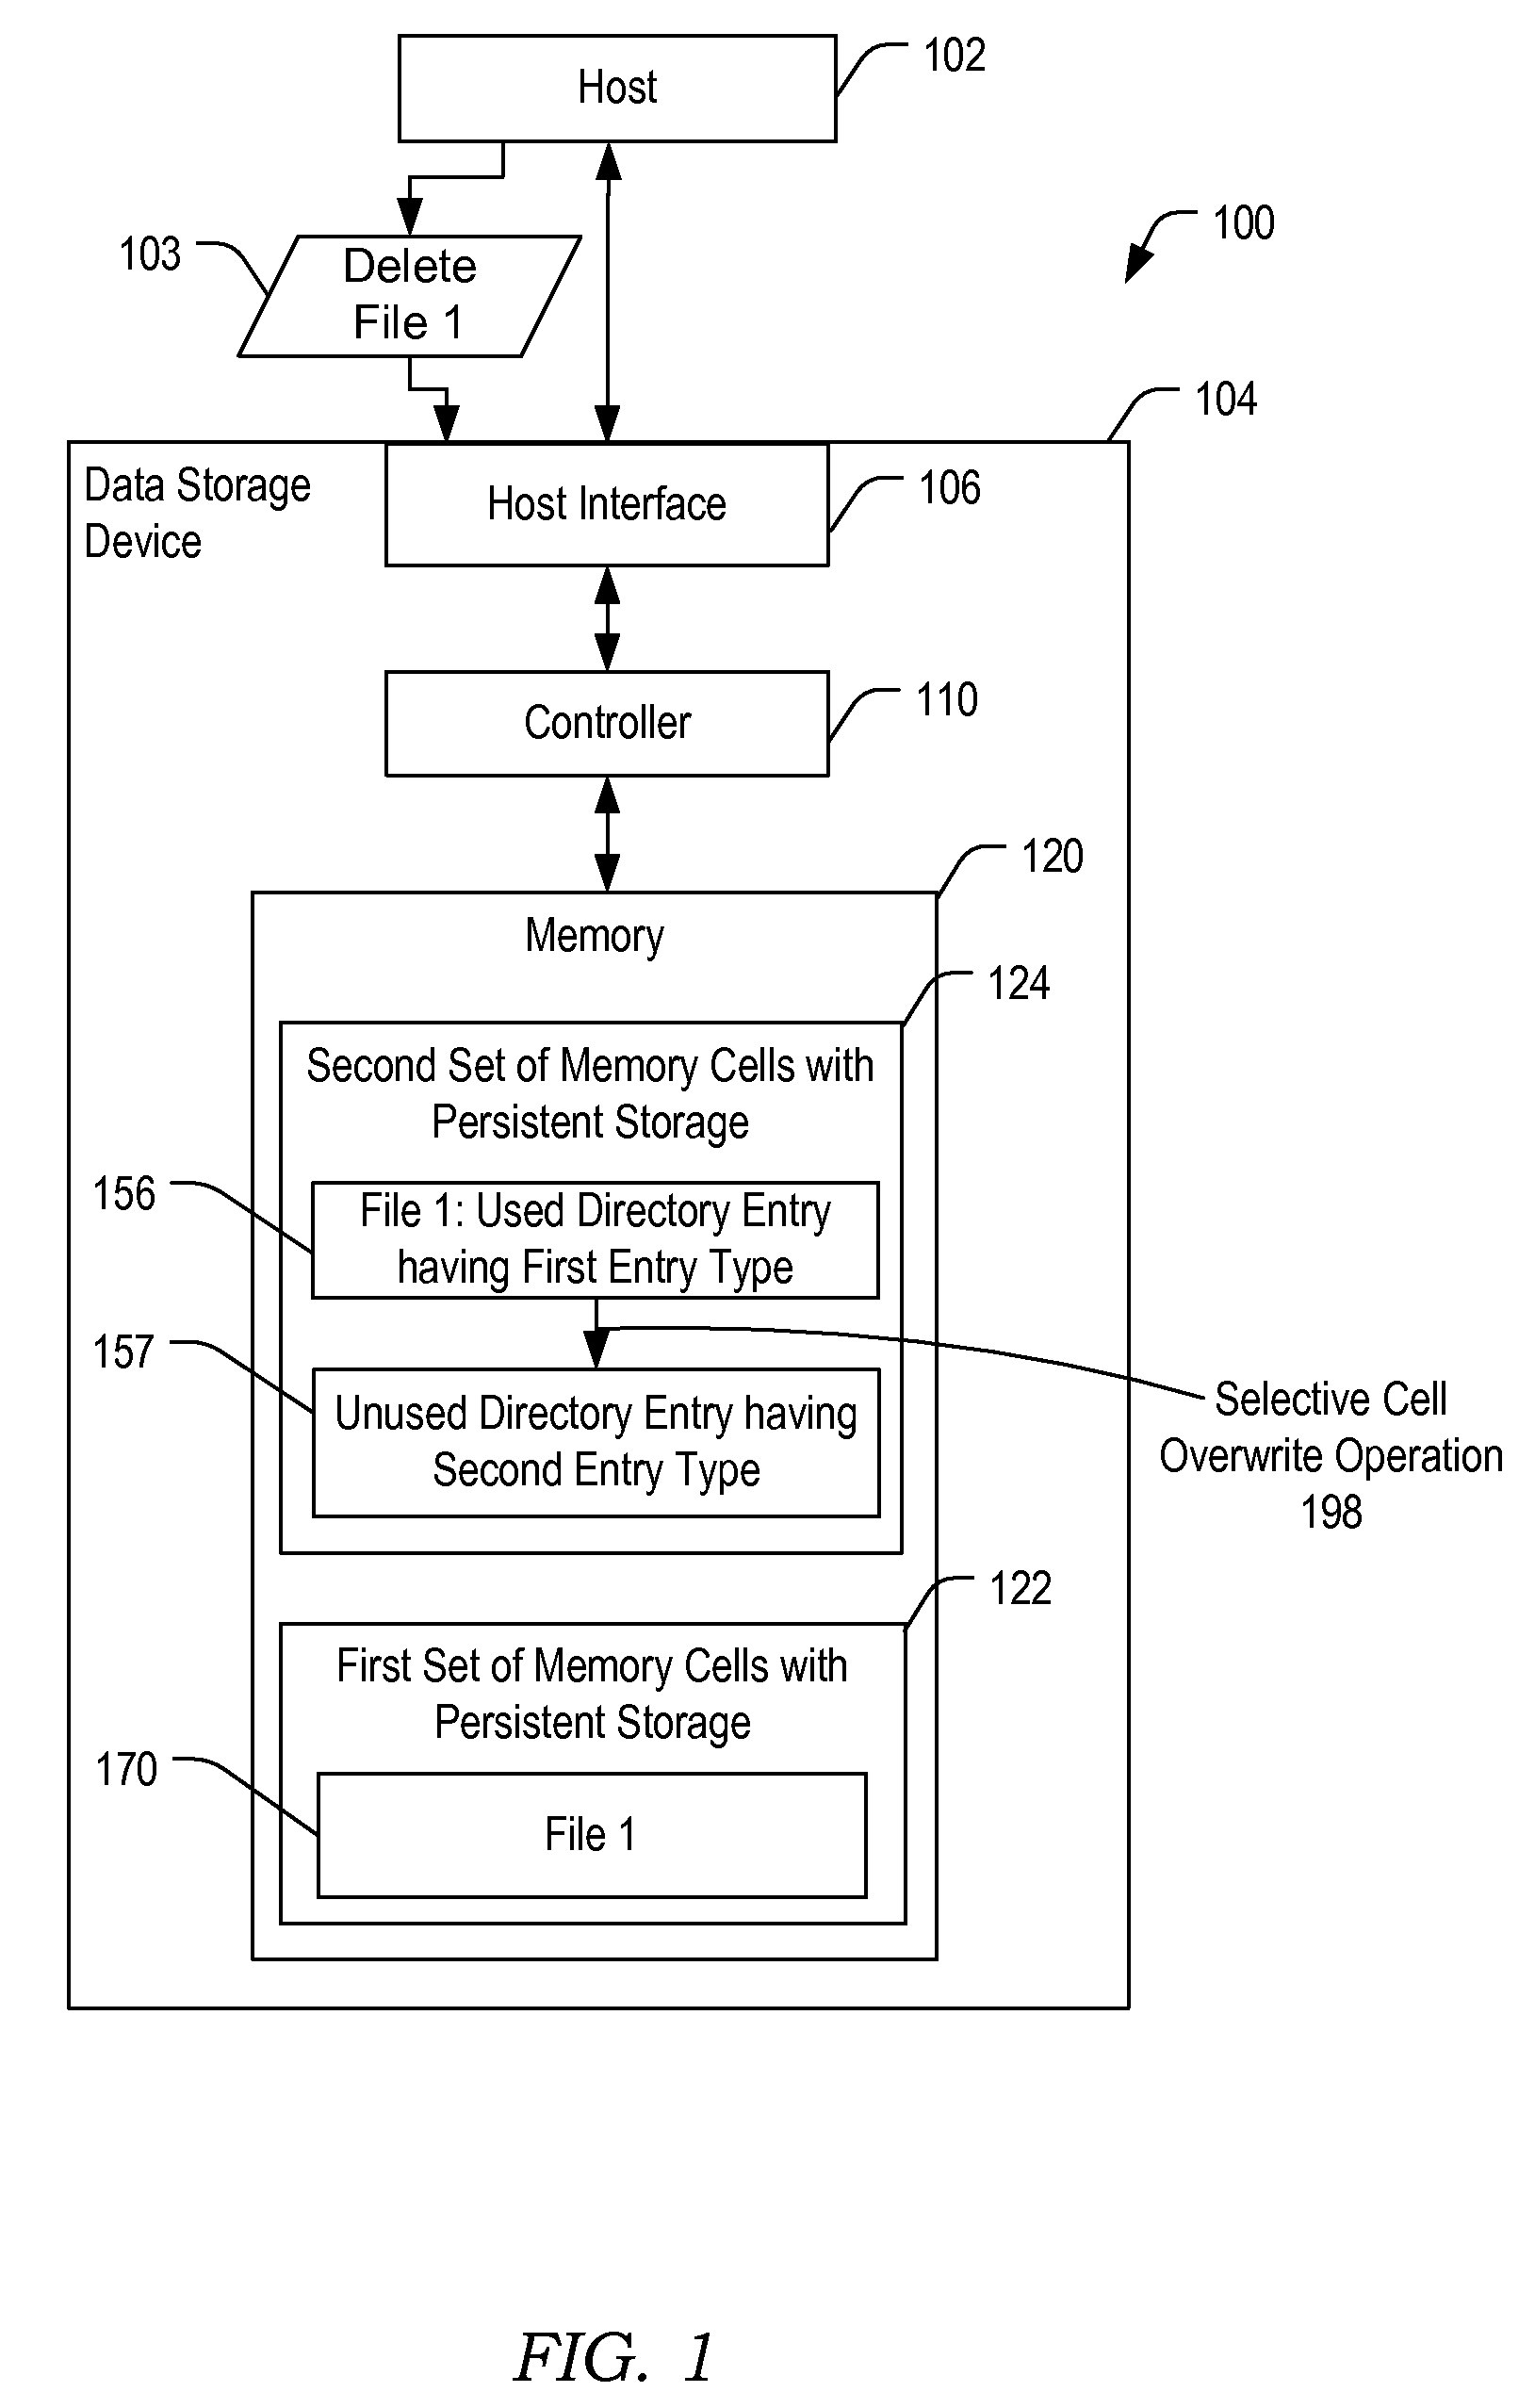 System and method to respond to a data file deletion instruction